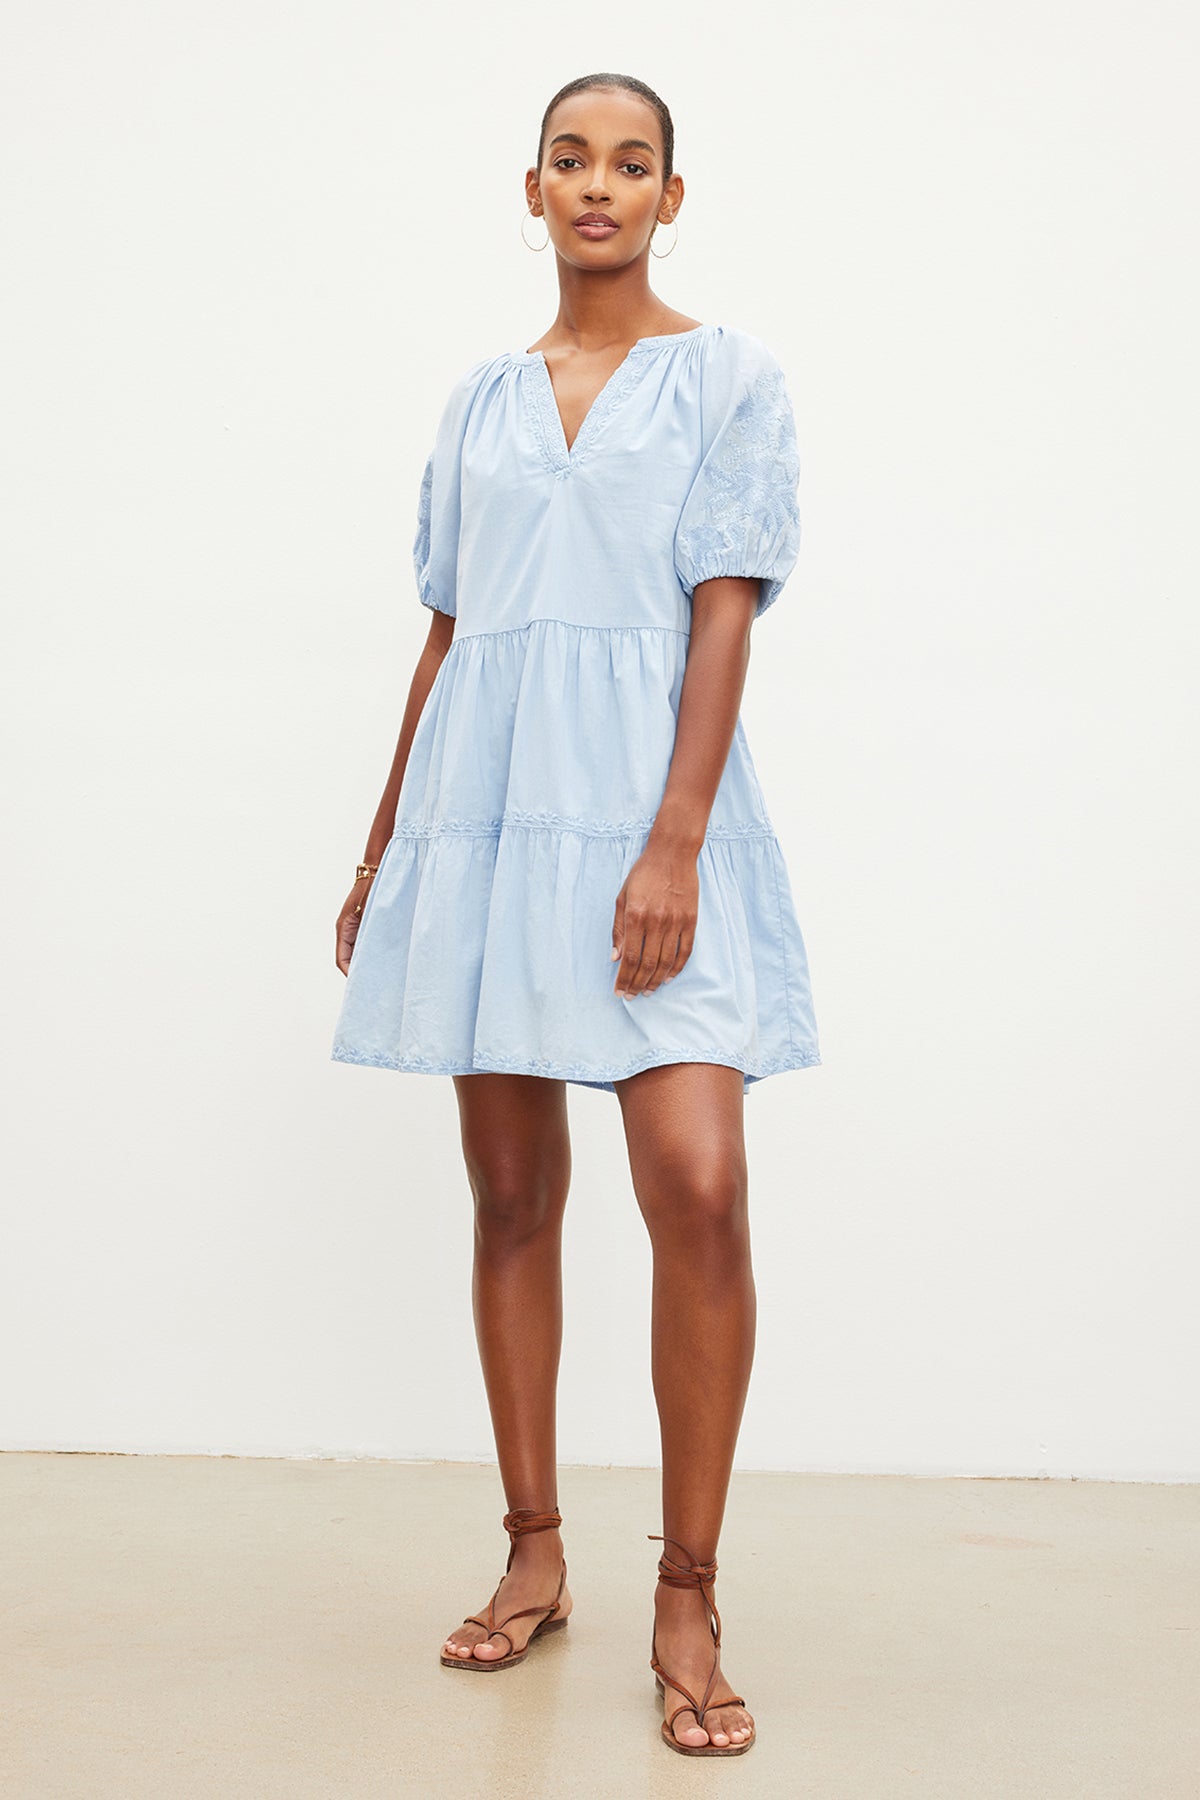 A woman in a light blue CHRISSY EMBROIDERED BOHO DRESS from Velvet by Graham & Spencer with floral embroidery and tan sandals stands confidently against a plain white background.-35955557269697